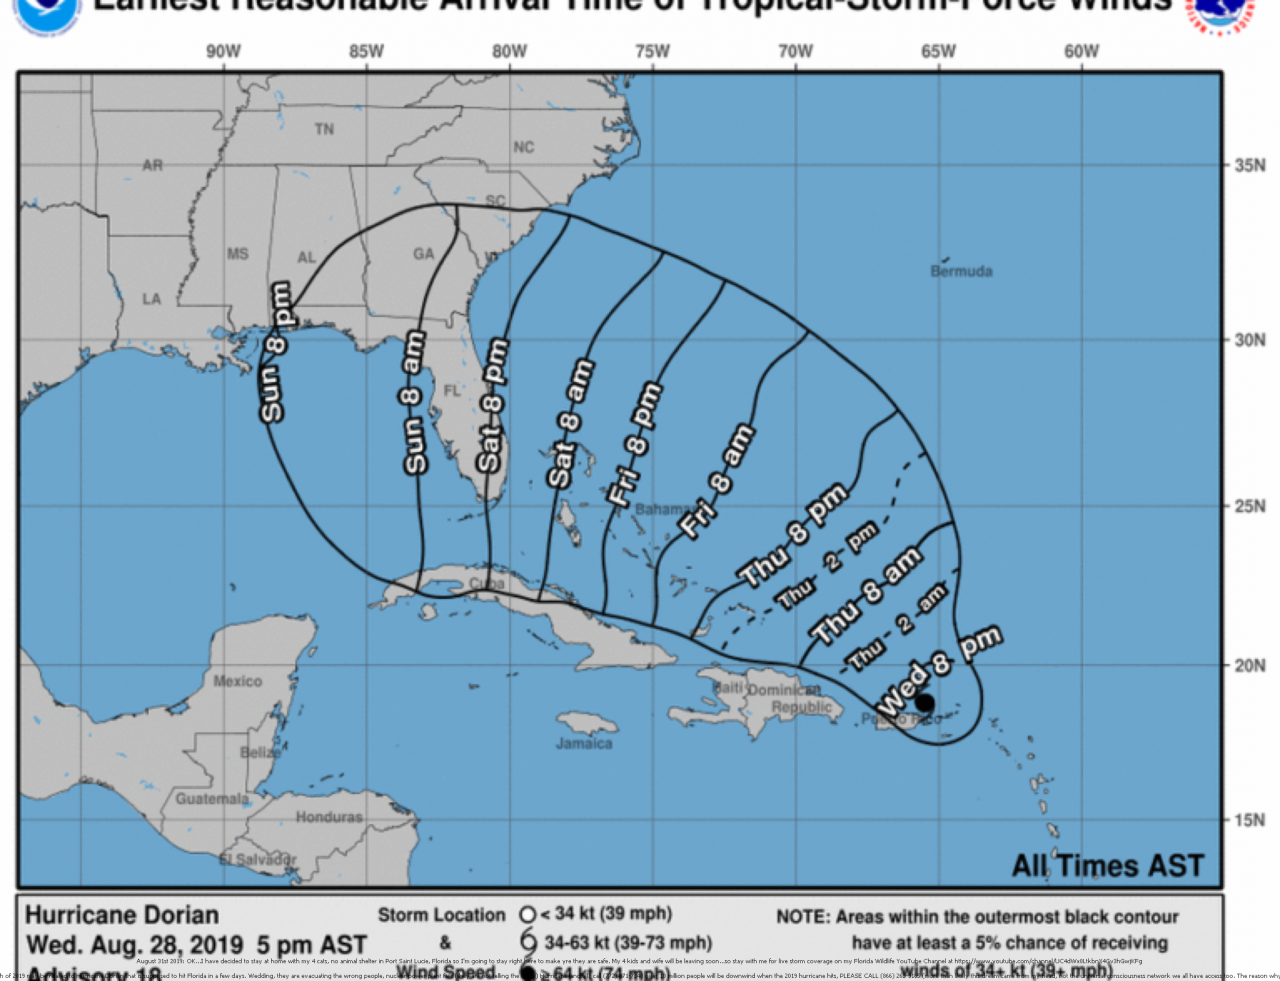 Hurricane Dorian Aug 2019 prediction by Psychic Brian Ladd Tropical-storm-force-winds-767x588
Hurricane Dorian Aug 2019 prediction by Psychic Brian Ladd Tropical-storm-force-winds-767x588
